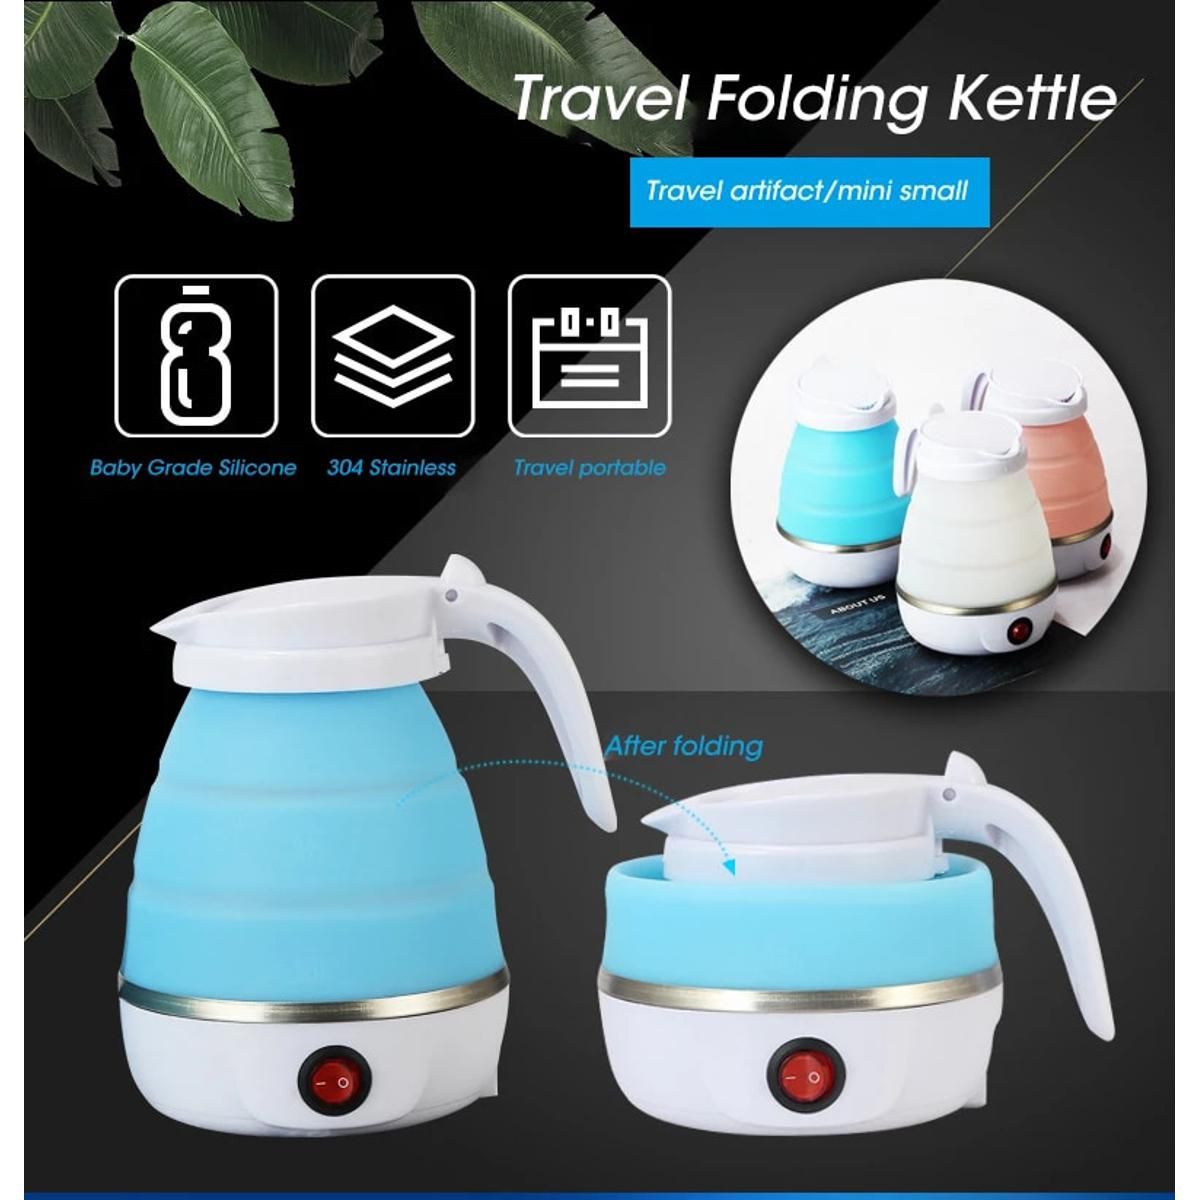 "Foldable Portable Electric Kettle: Travel & Home Use"